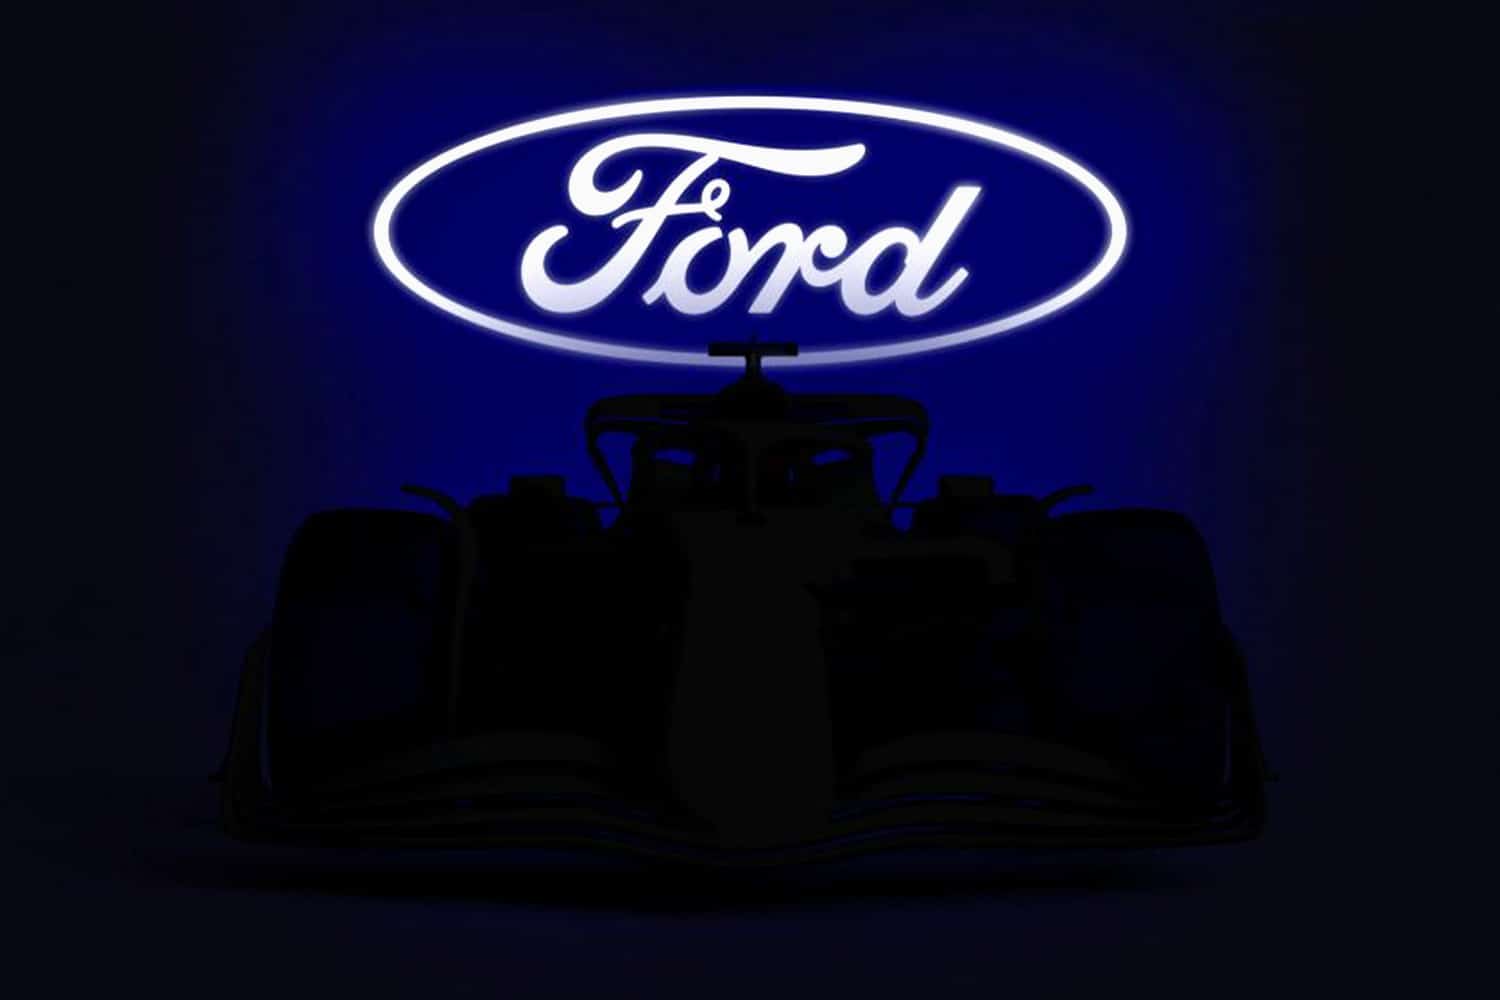   
																FOS PM: Ford Joins Formula 1 
															 